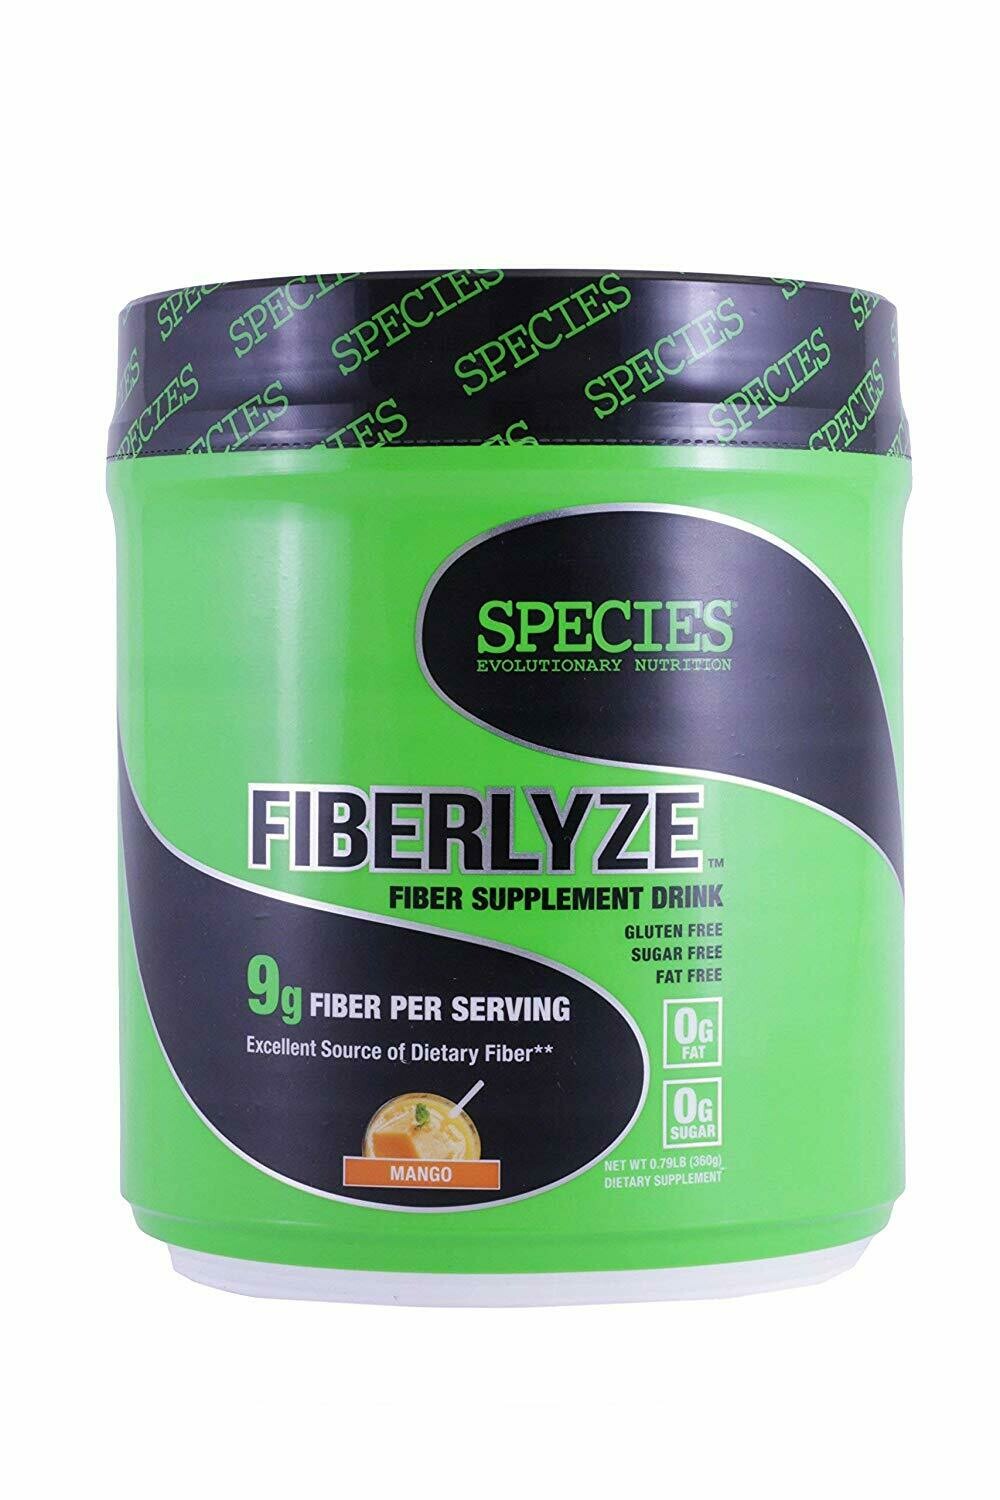 FIBERLYZE:  Made in the USA.
NEW STOCK LANDING 30th May 2022